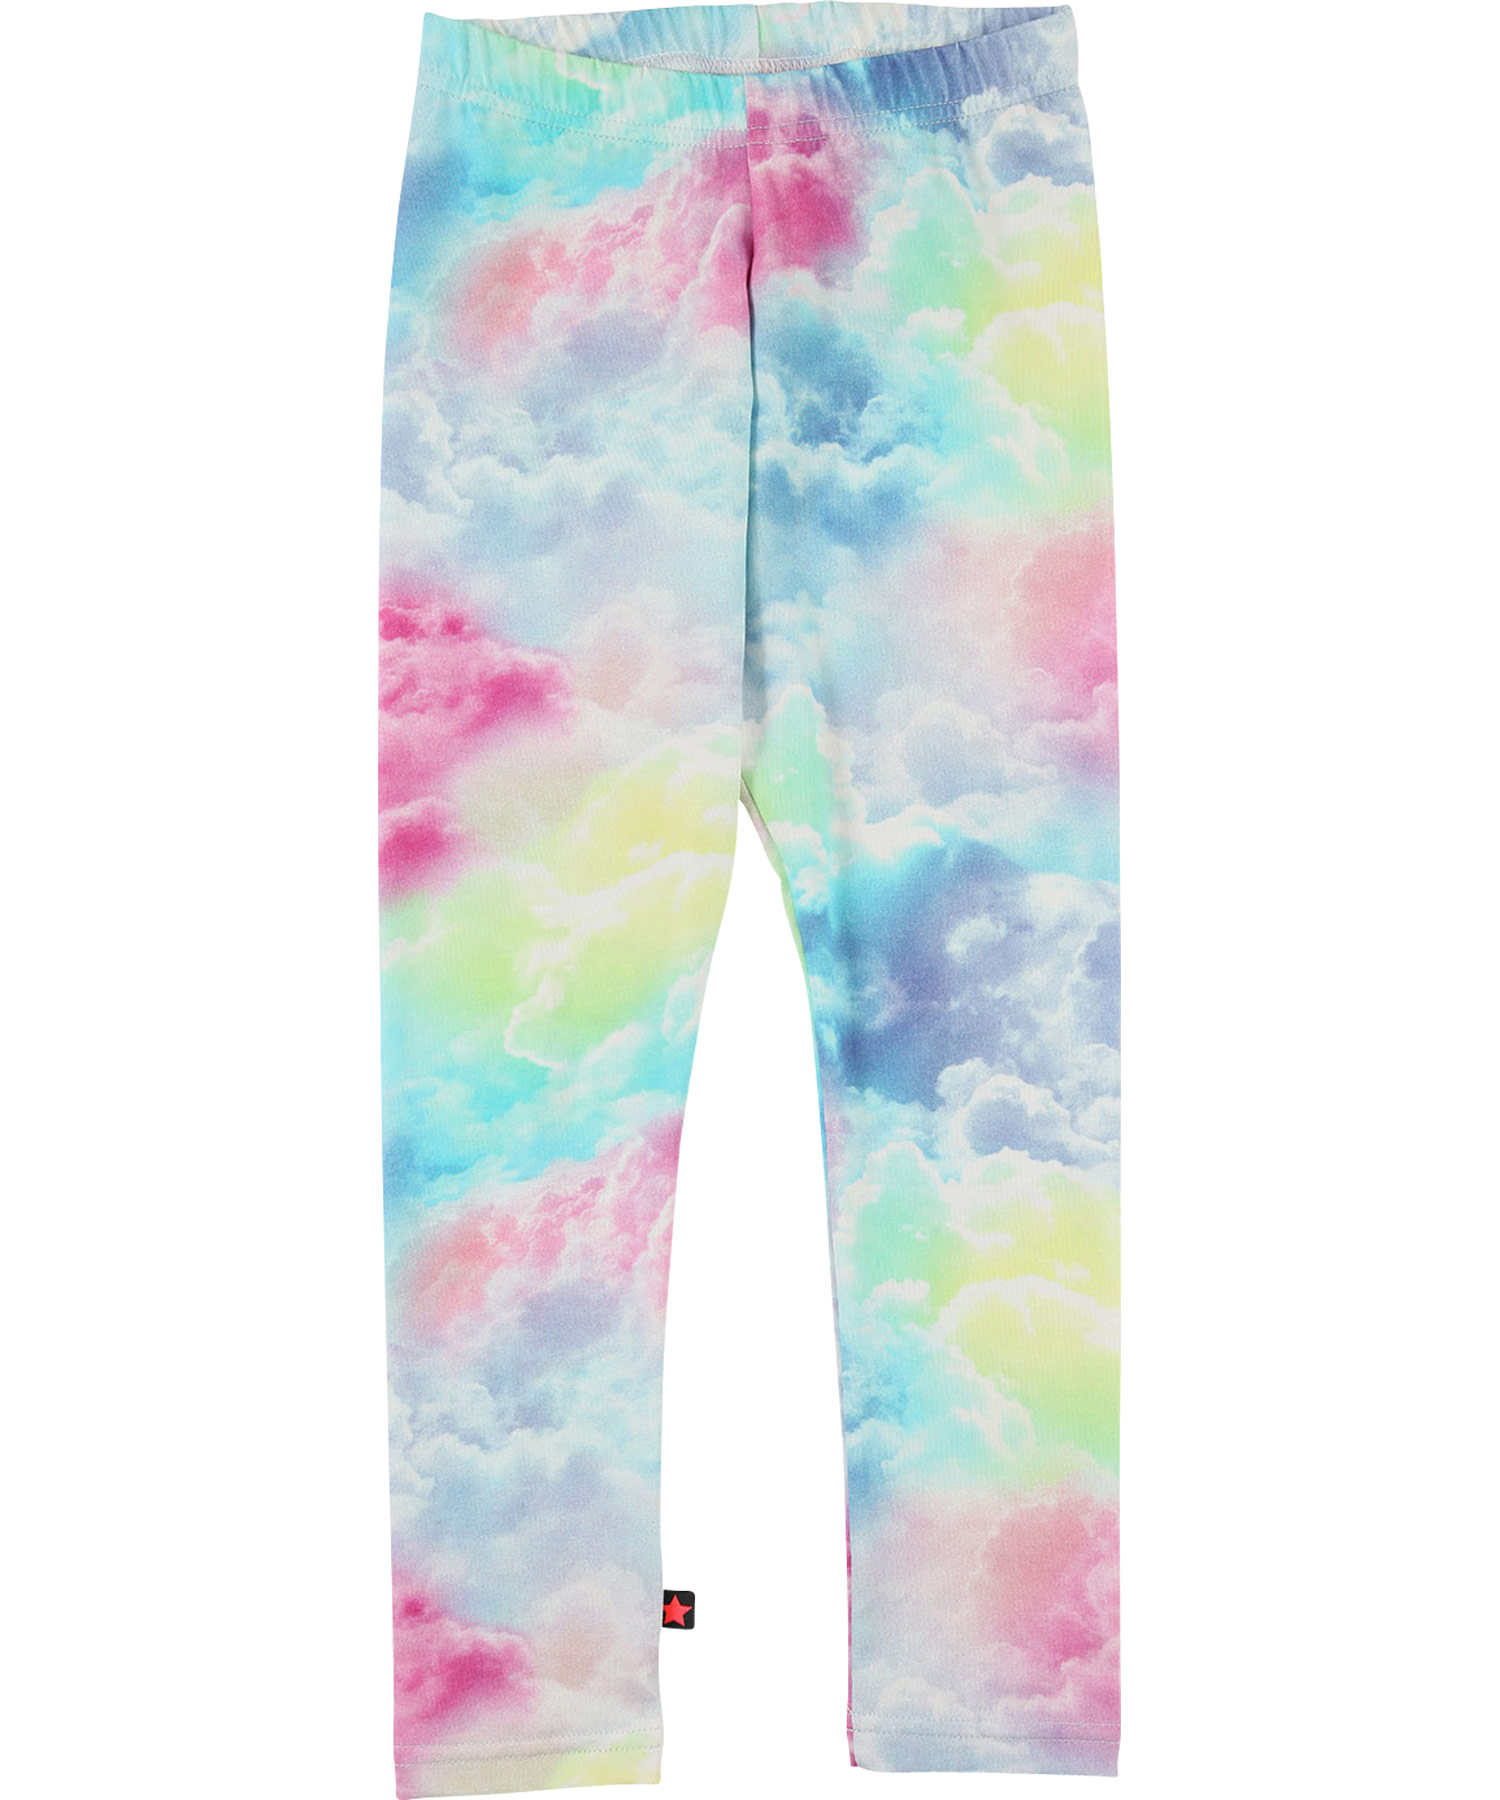 New! Molo Colorful Leggings with Rainbow Clouds Print (Niki)